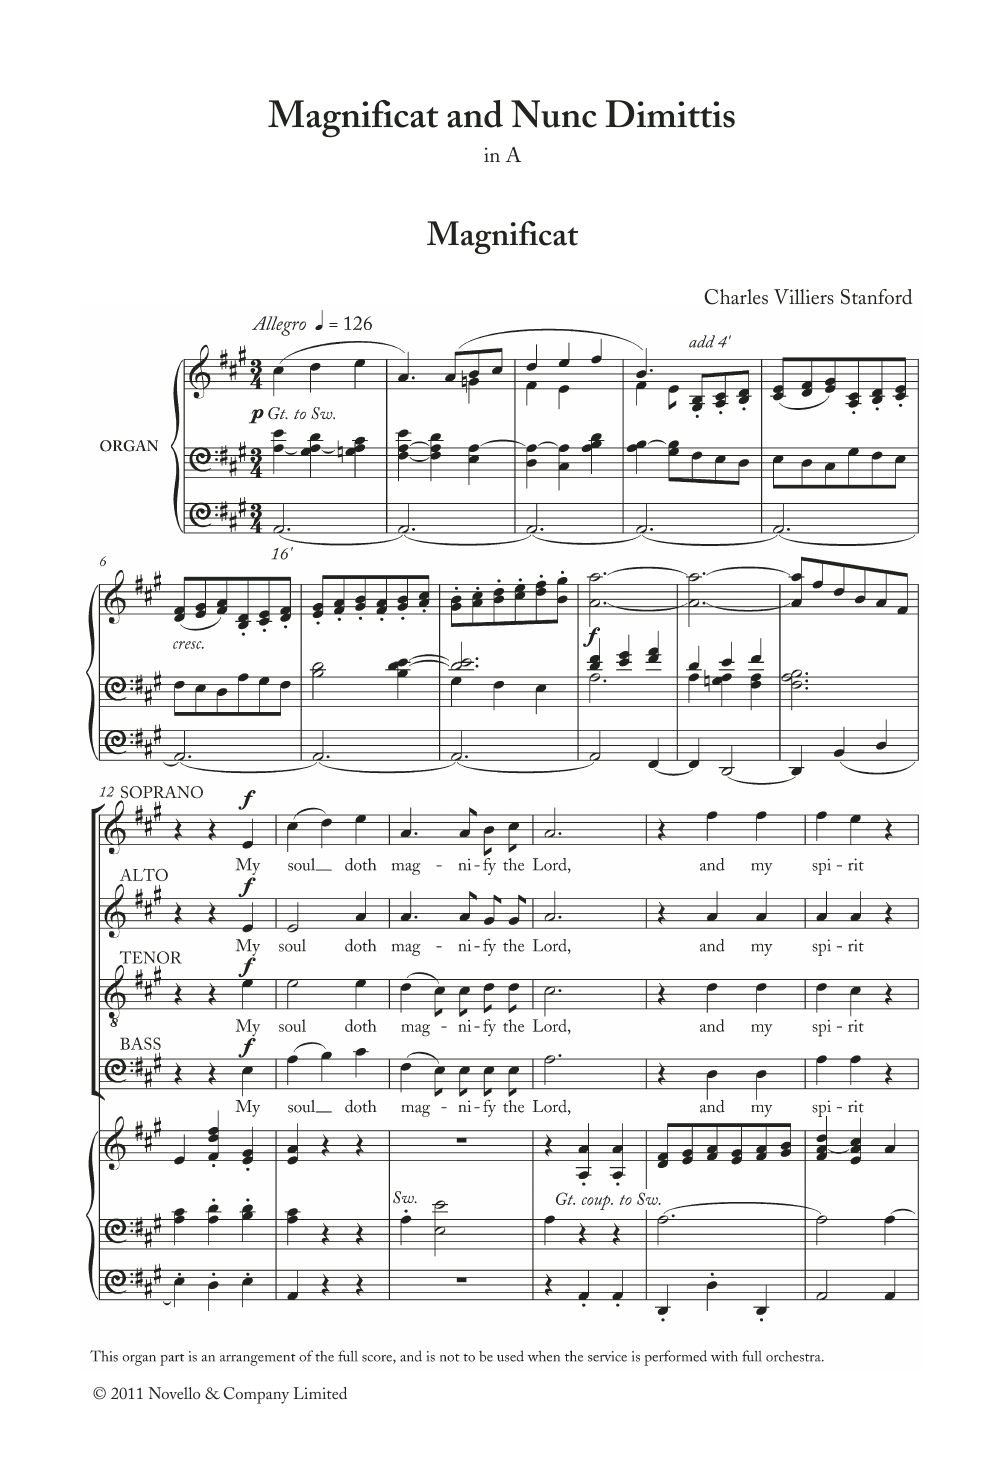 Magnificat And Nunc Dimittis In A sheet music